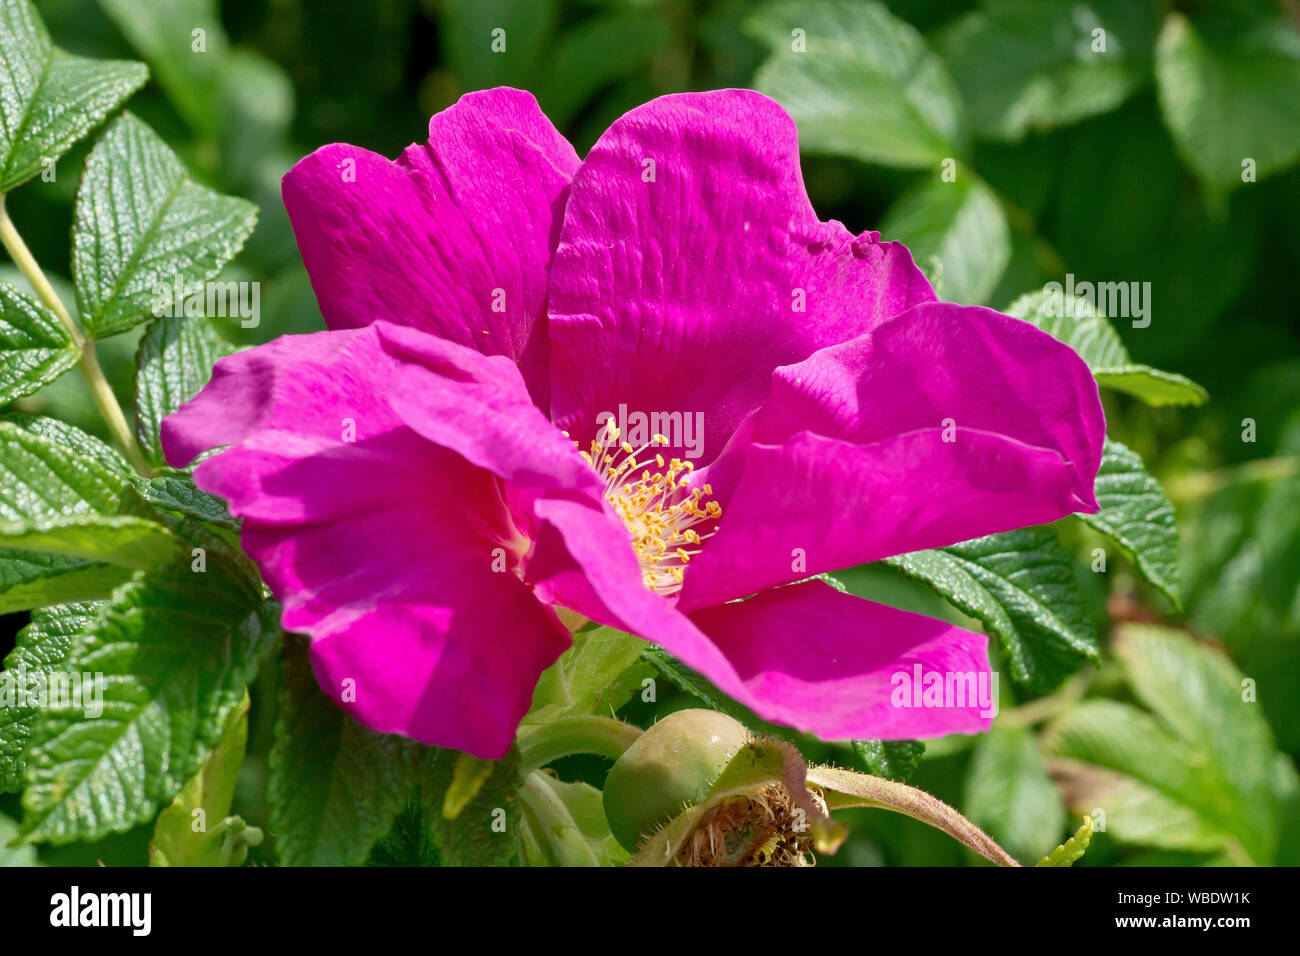 Wild Rose (rosa rugosa rubra), close up showing the flower and a developing rose hip or seed pod. Stock Photo